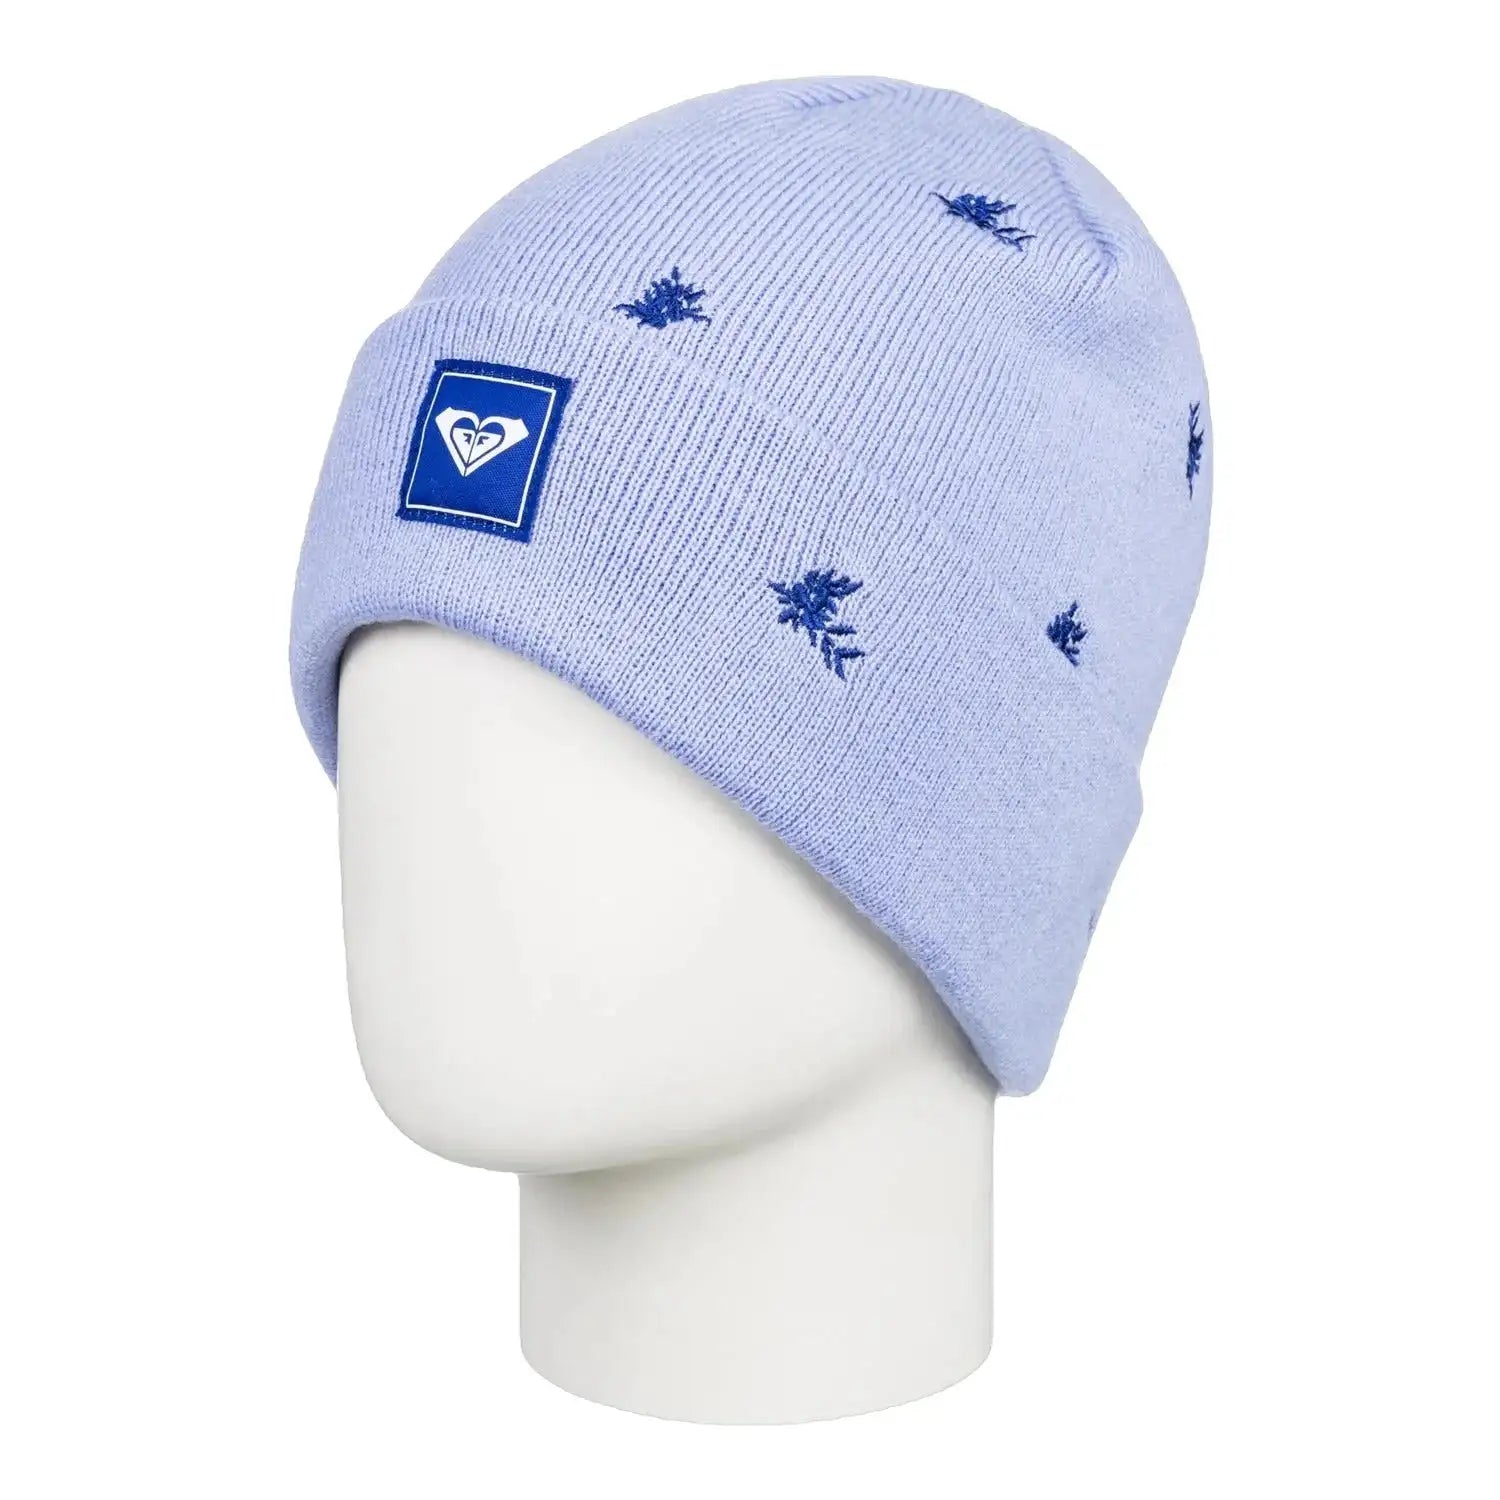 Roxy Girl's Hedda Beanie shown in Easter Egg color option. Front side view.